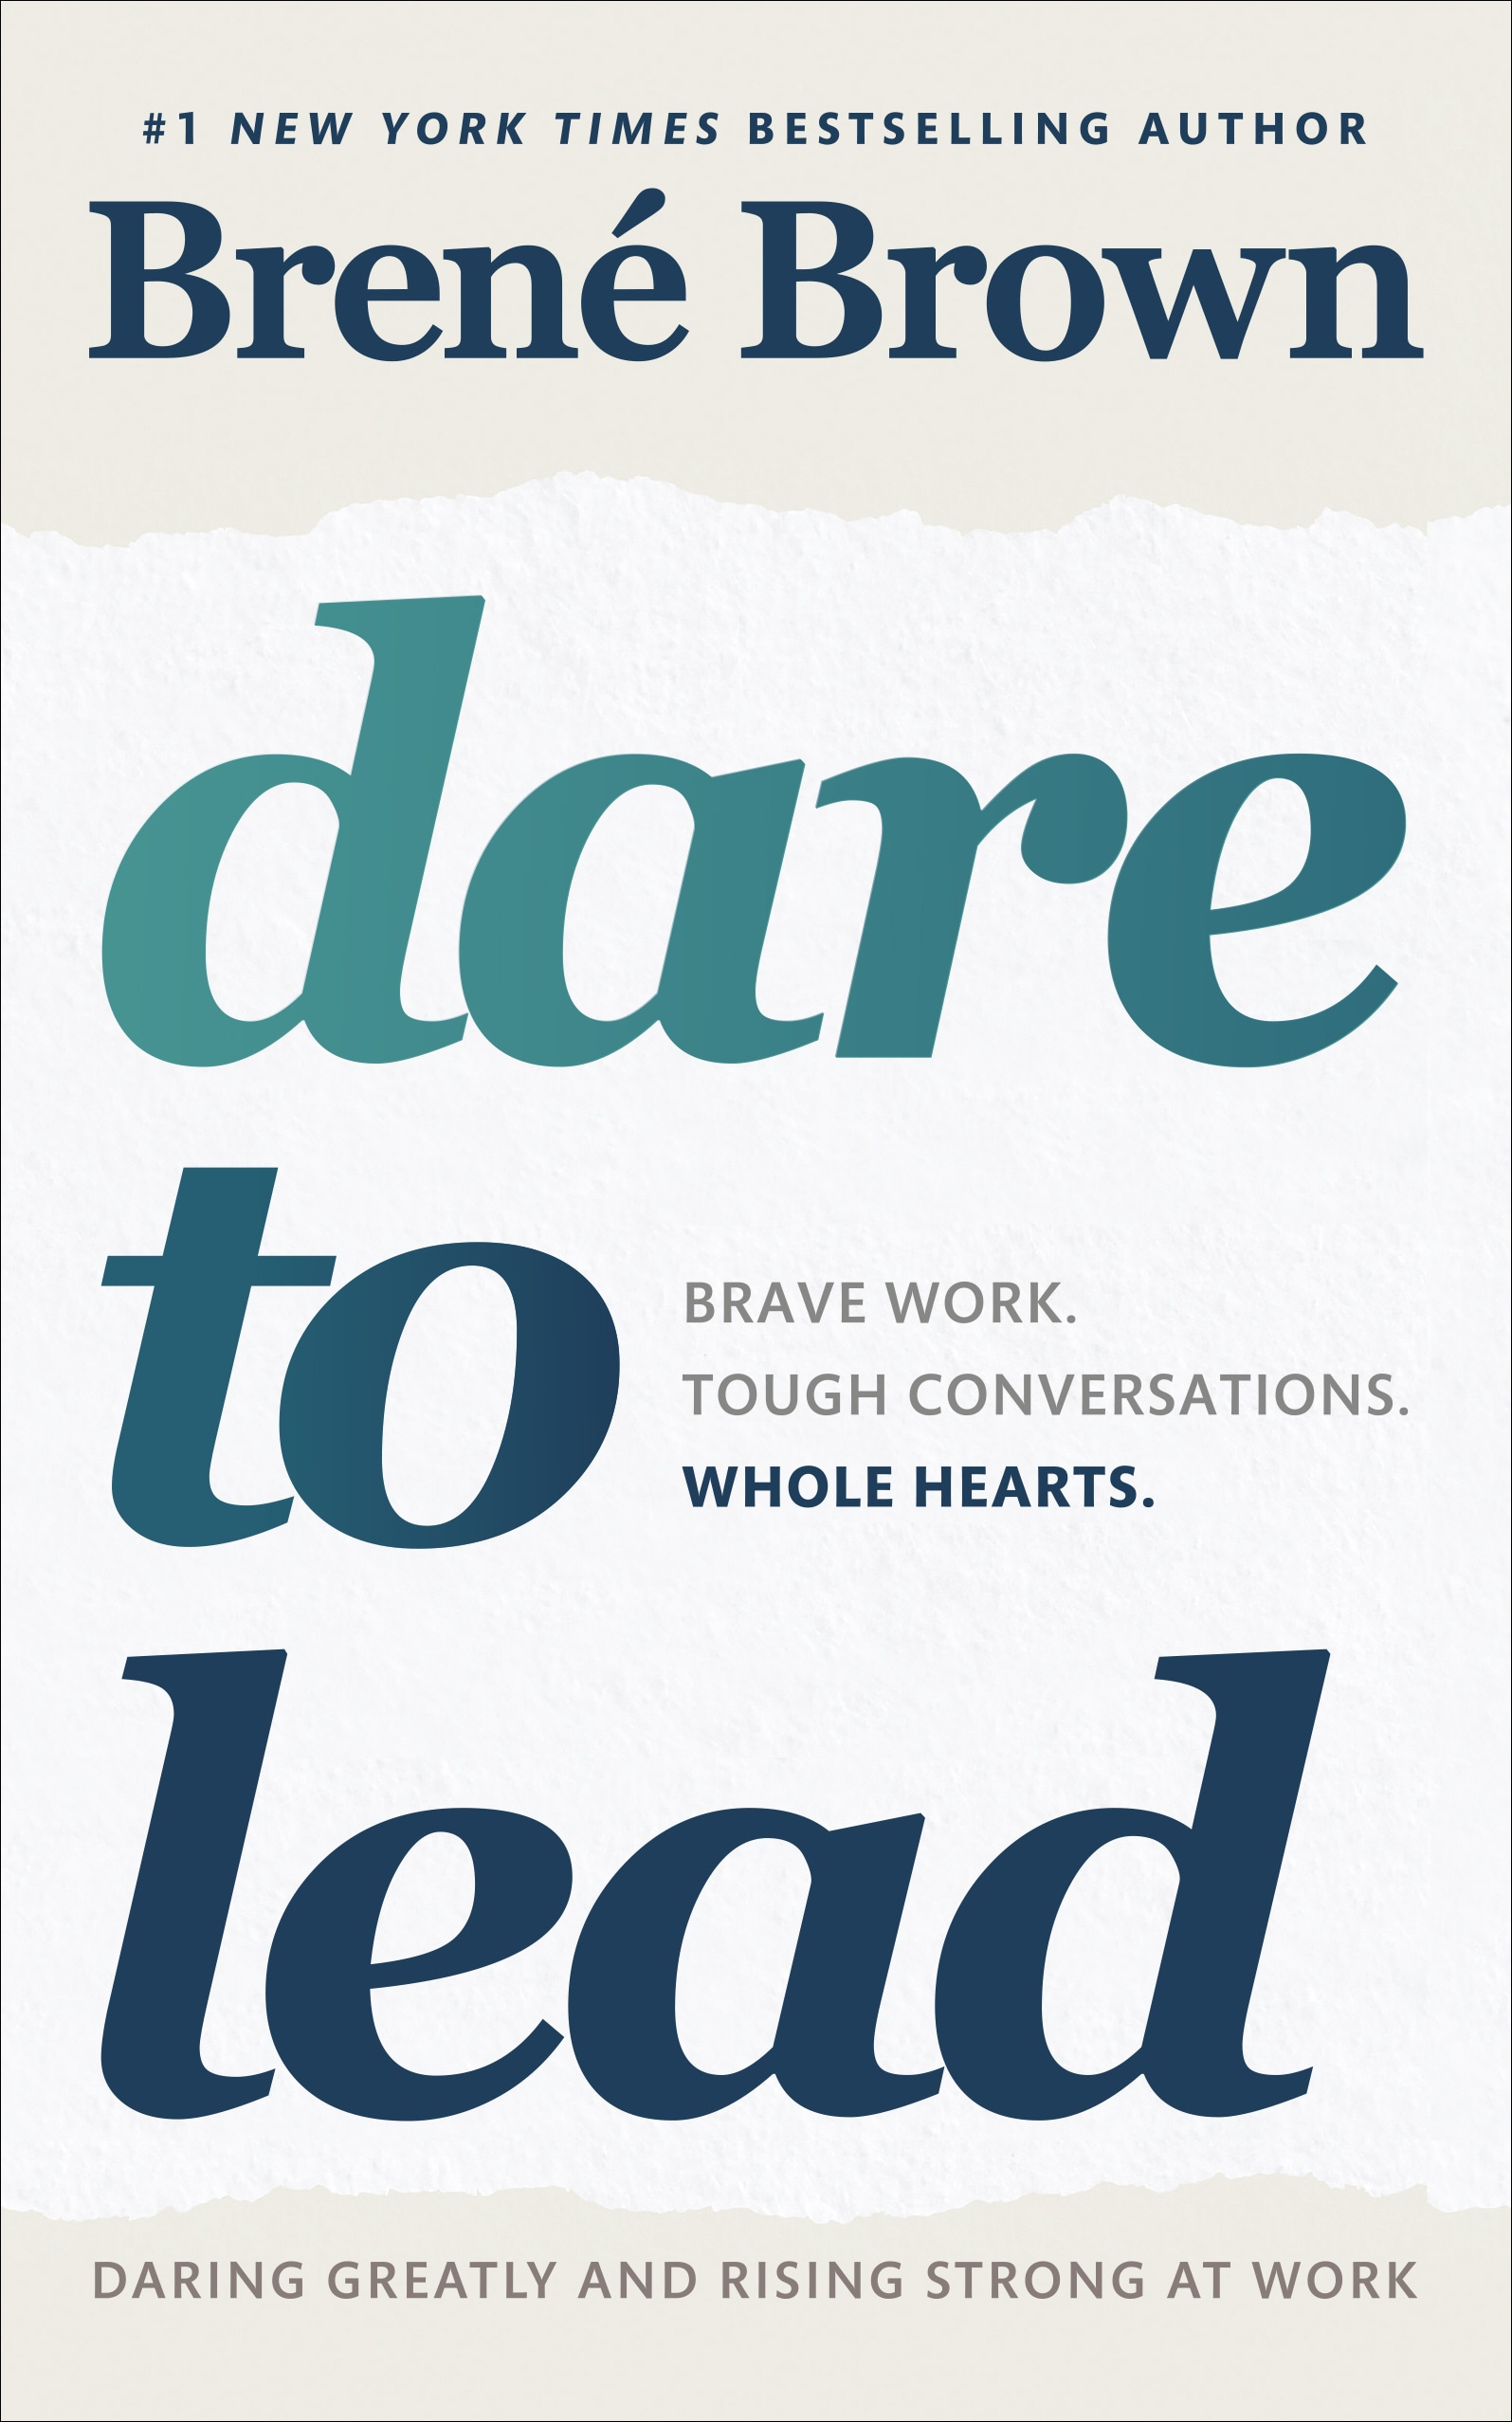 Book “Dare to Lead” by Brené Brown — October 11, 2018